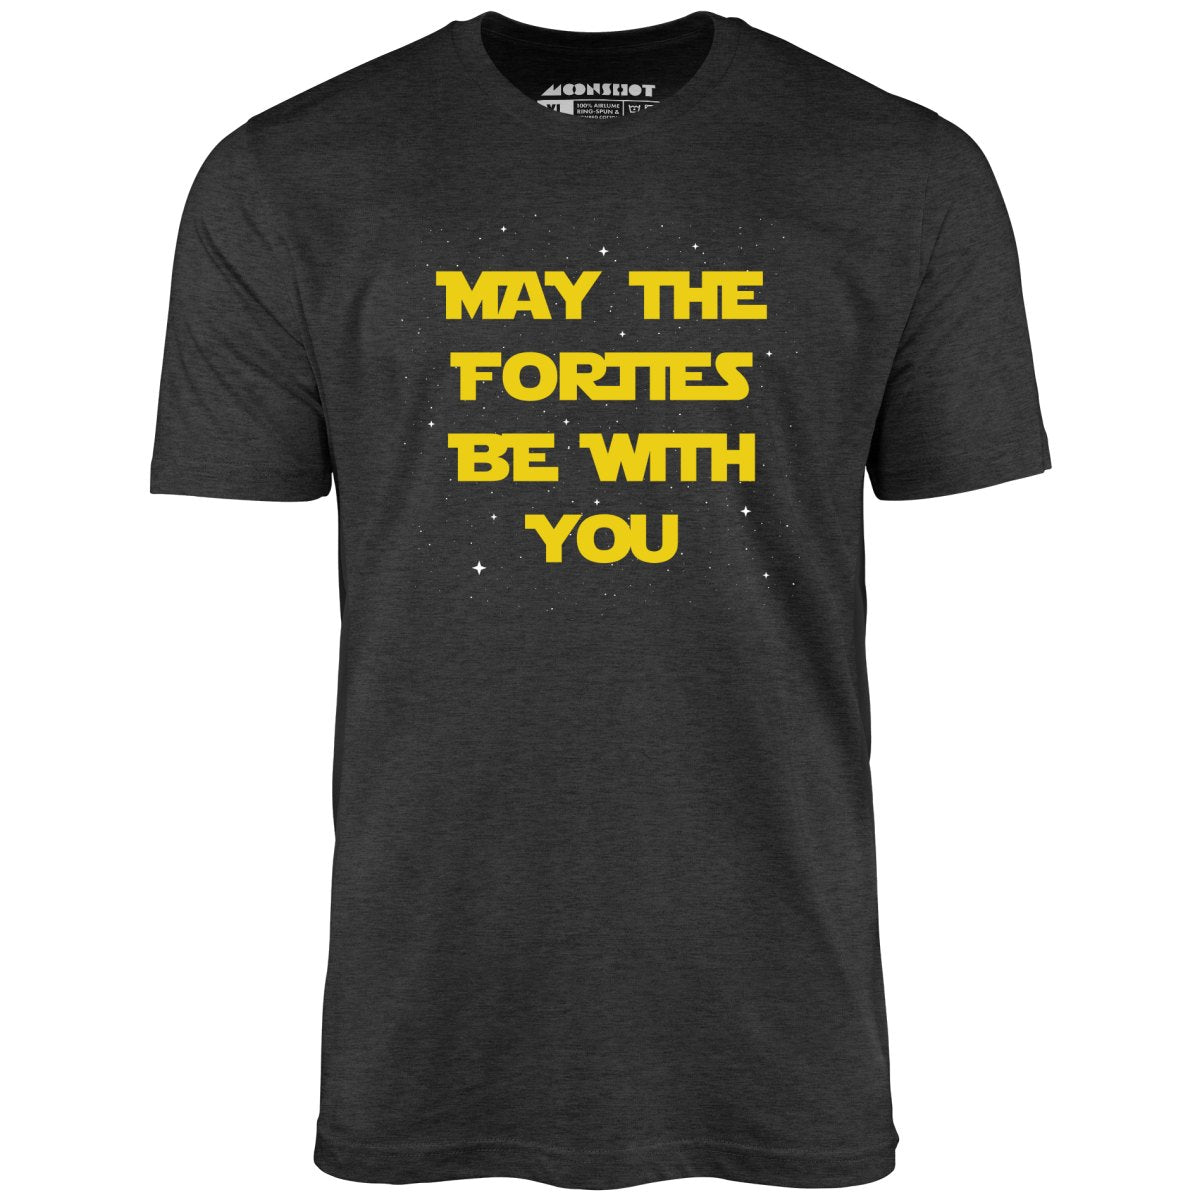 May The Forties Be With You - Unisex T-Shirt